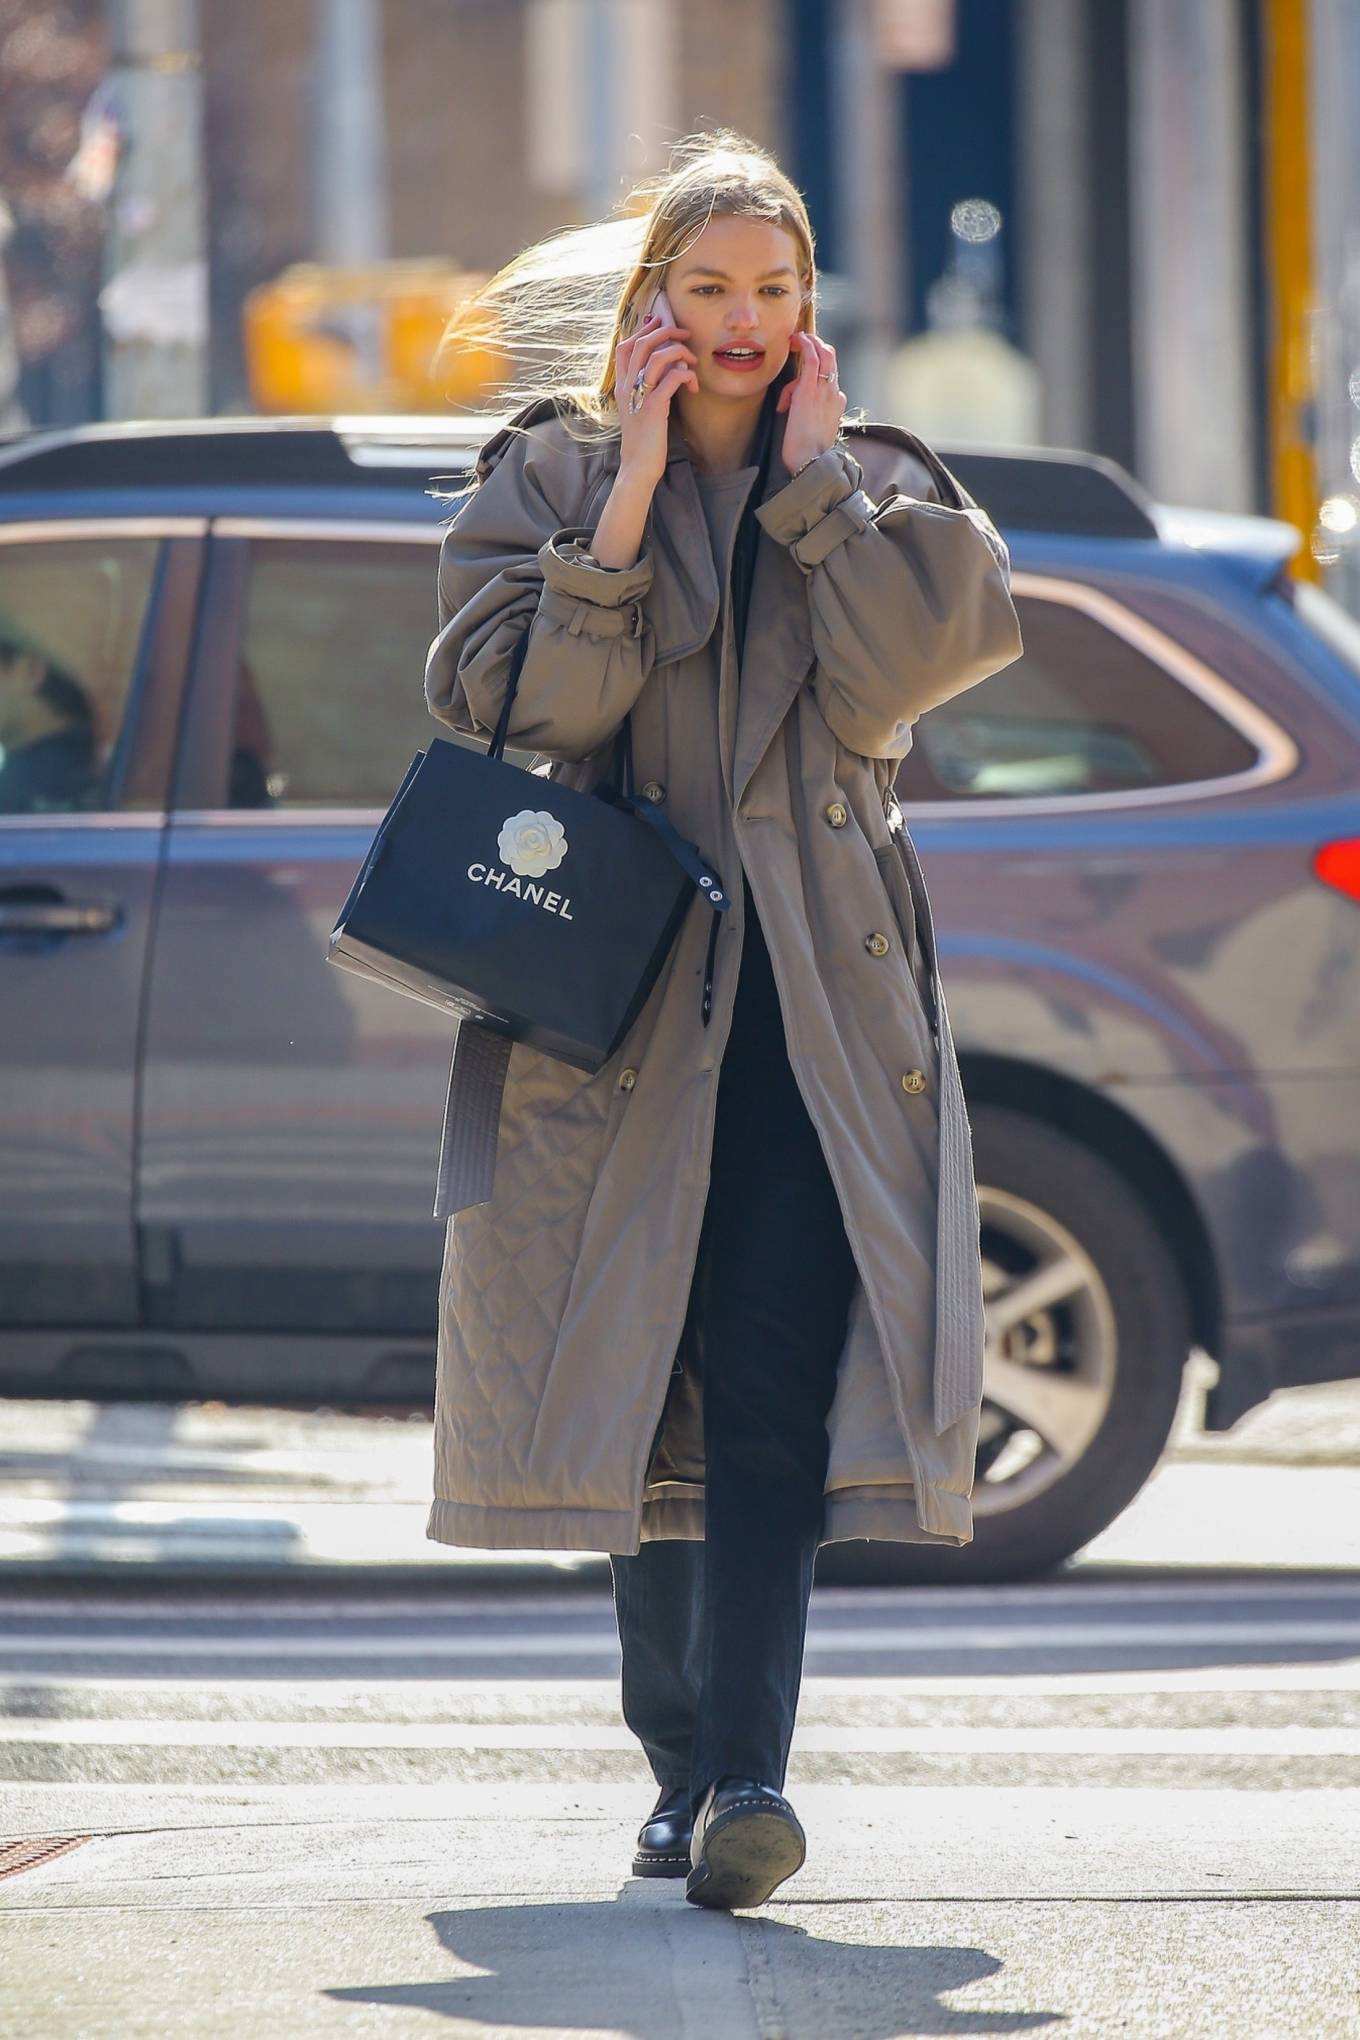 Stella Maxwell 2022 : Stella Maxwell – Dons a trench coat during a shopping trip on 5th Ave in New York-03